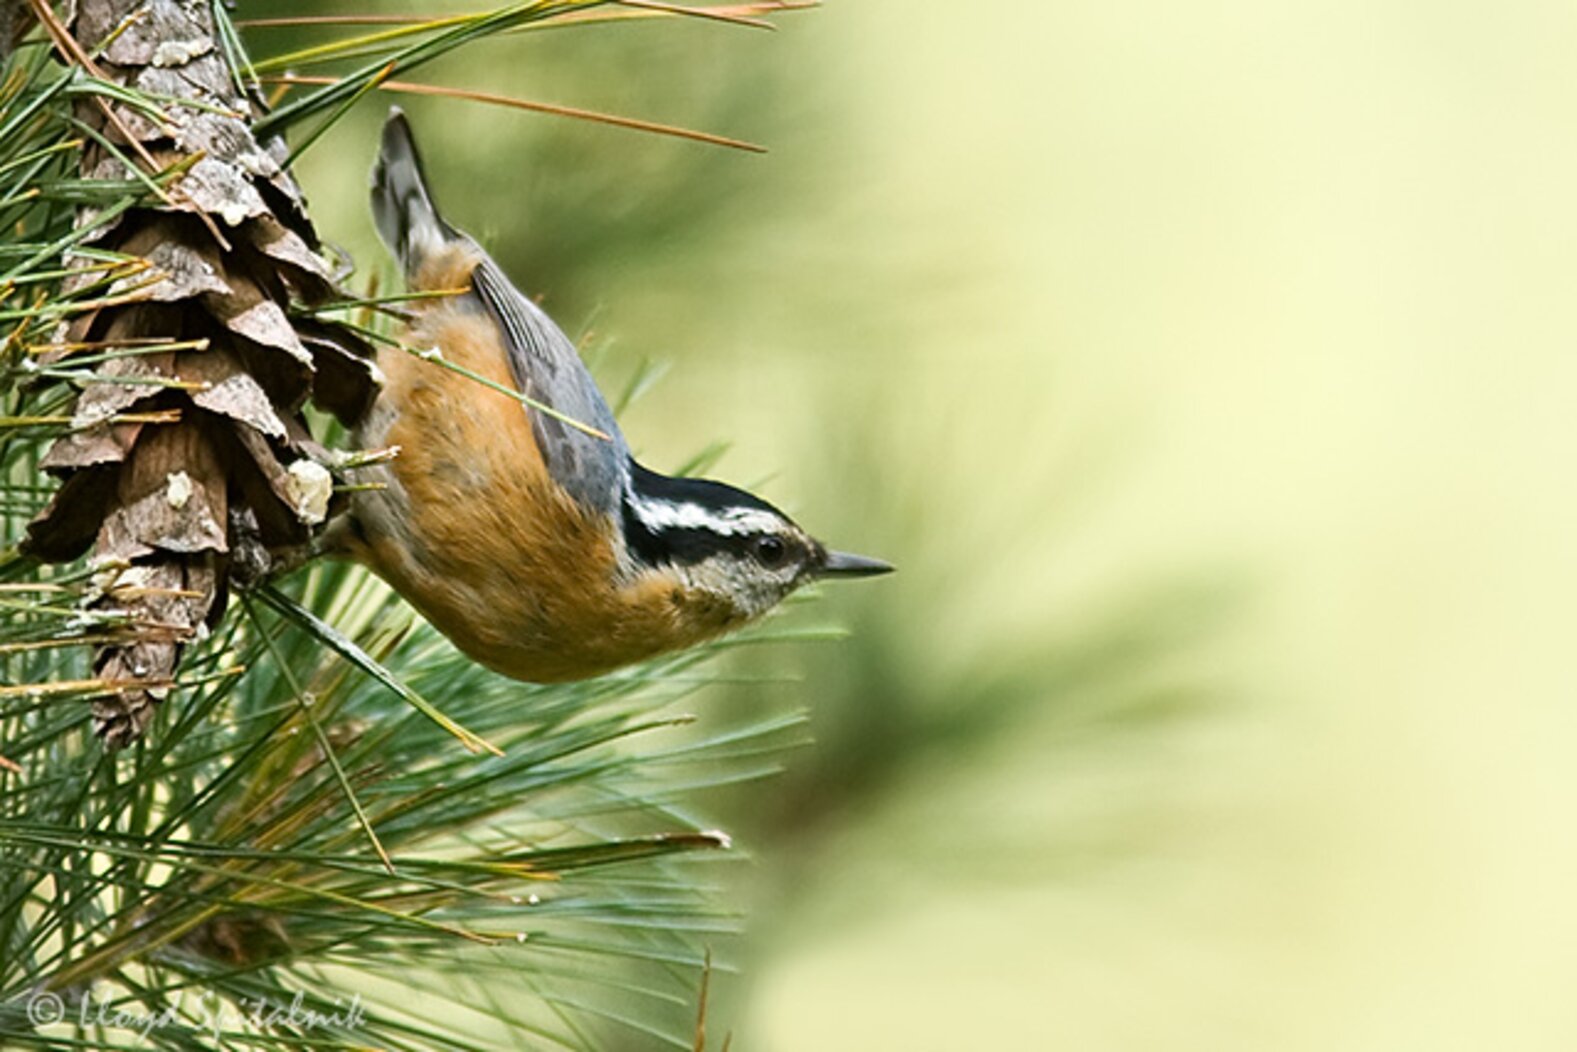 The nasal call of the Red-breasted Nuthatch can be heard during migration and over the winter; numbers vary from year to year. Photo: <a href="https://www.lloydspitalnik.com/index" target="_blank">Lloyd Spitalnik</a>